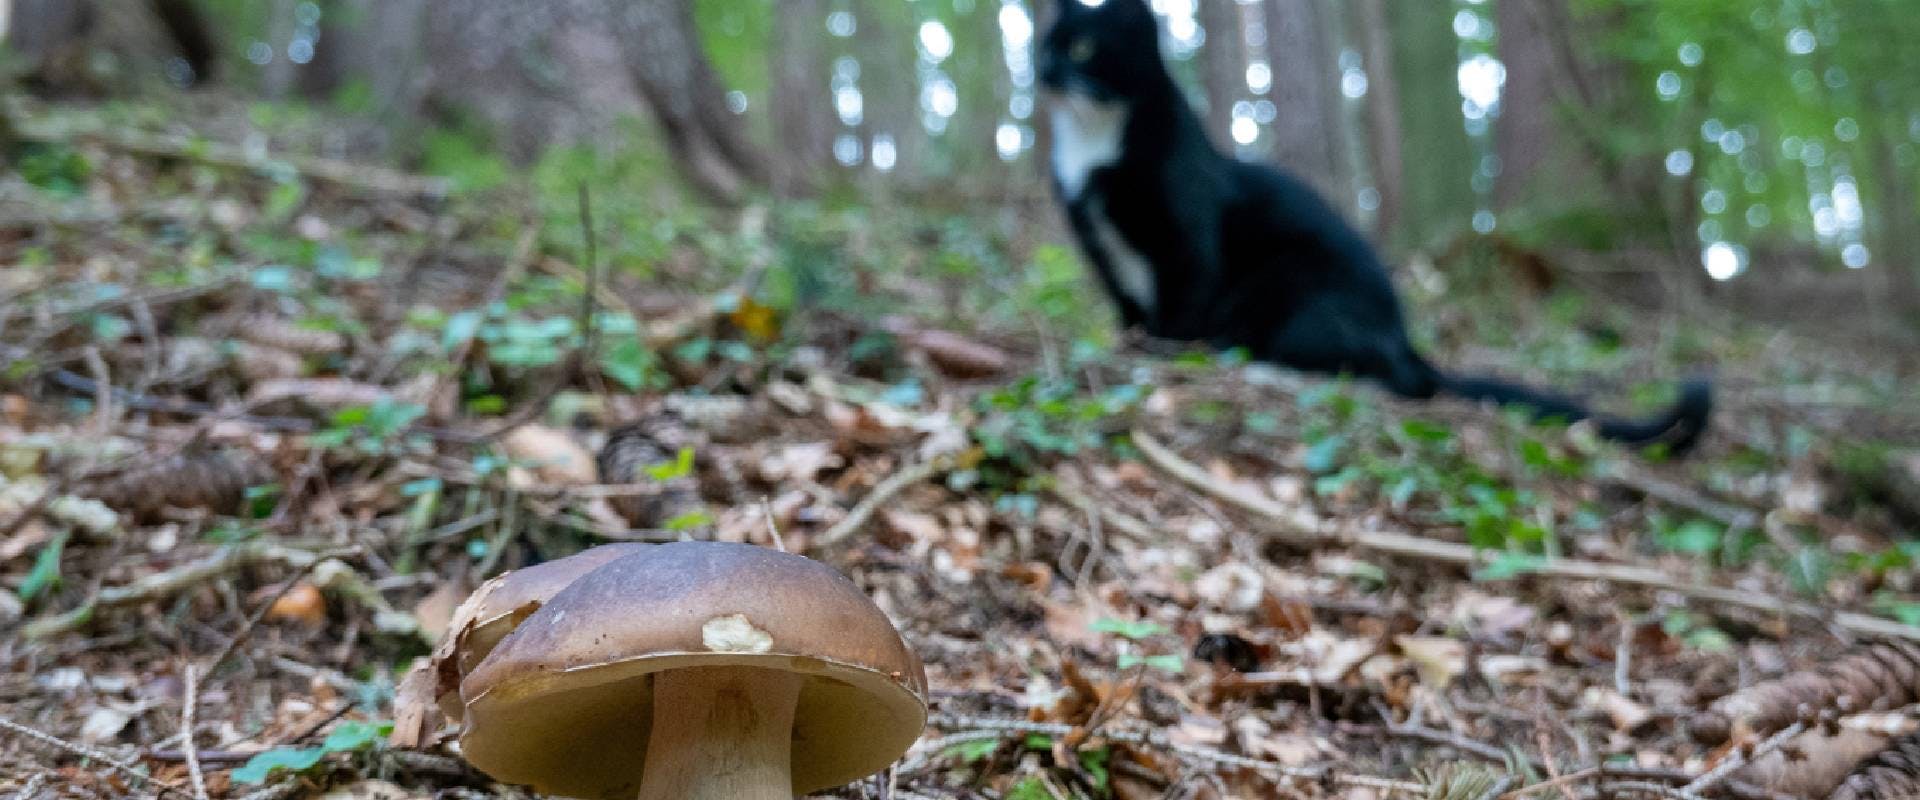 Porcini in the forest with a black cat 